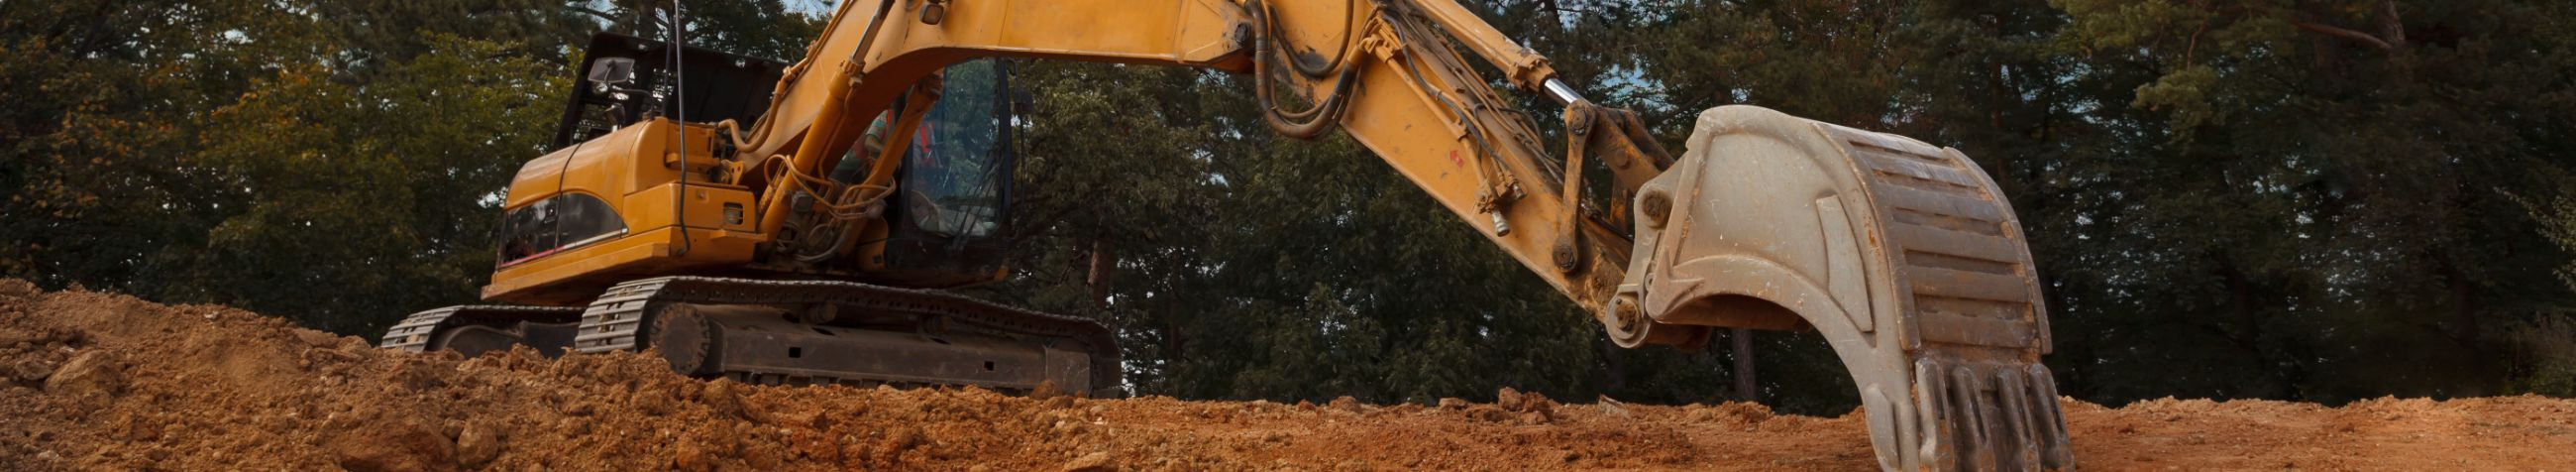 Excavator, surface analysis, foundation excavation, Levelling, construction of ditches, heavy machinery, transport of soil, use of excavators, soil removal, exhumation support